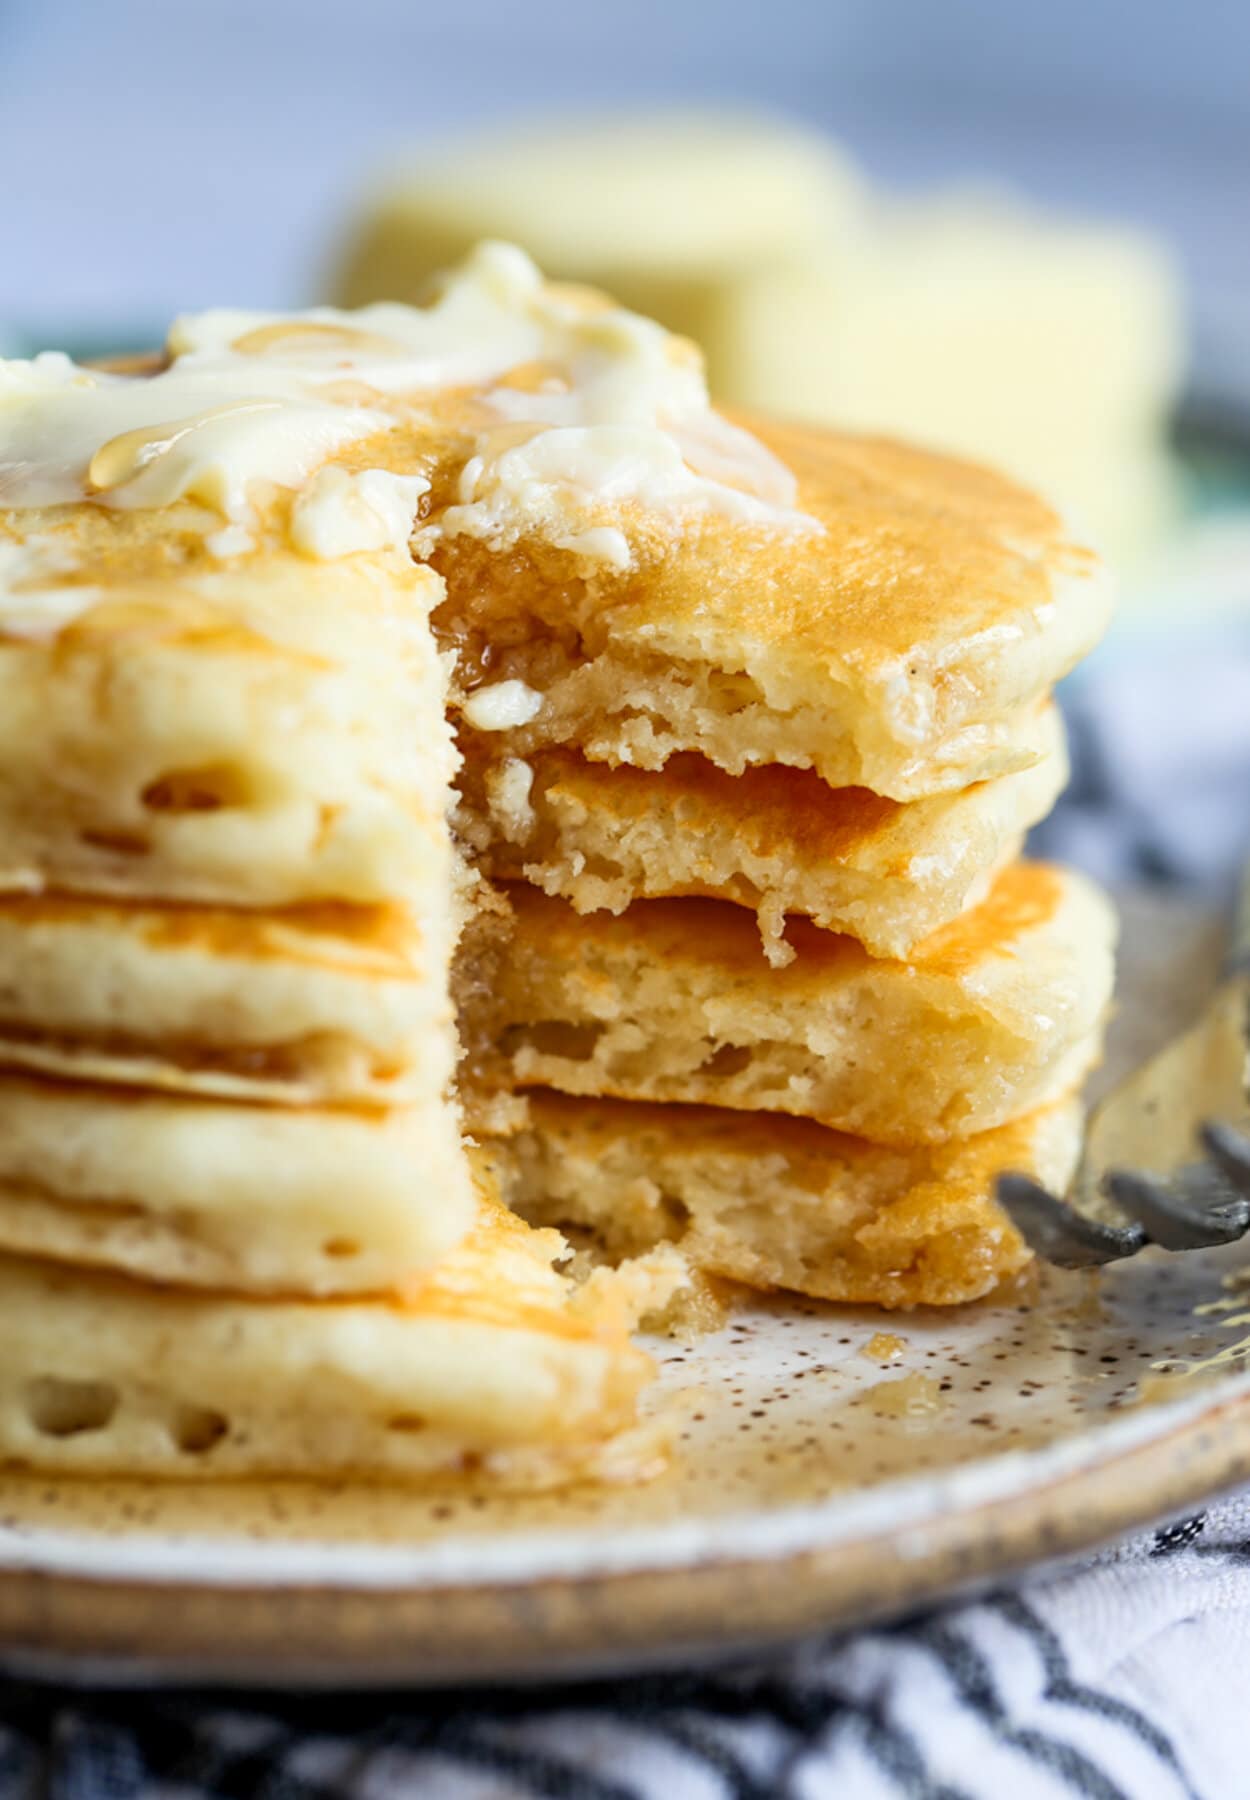 Buttermilk Pancakes stacked with a portion cut out showing the insides of the pancakes